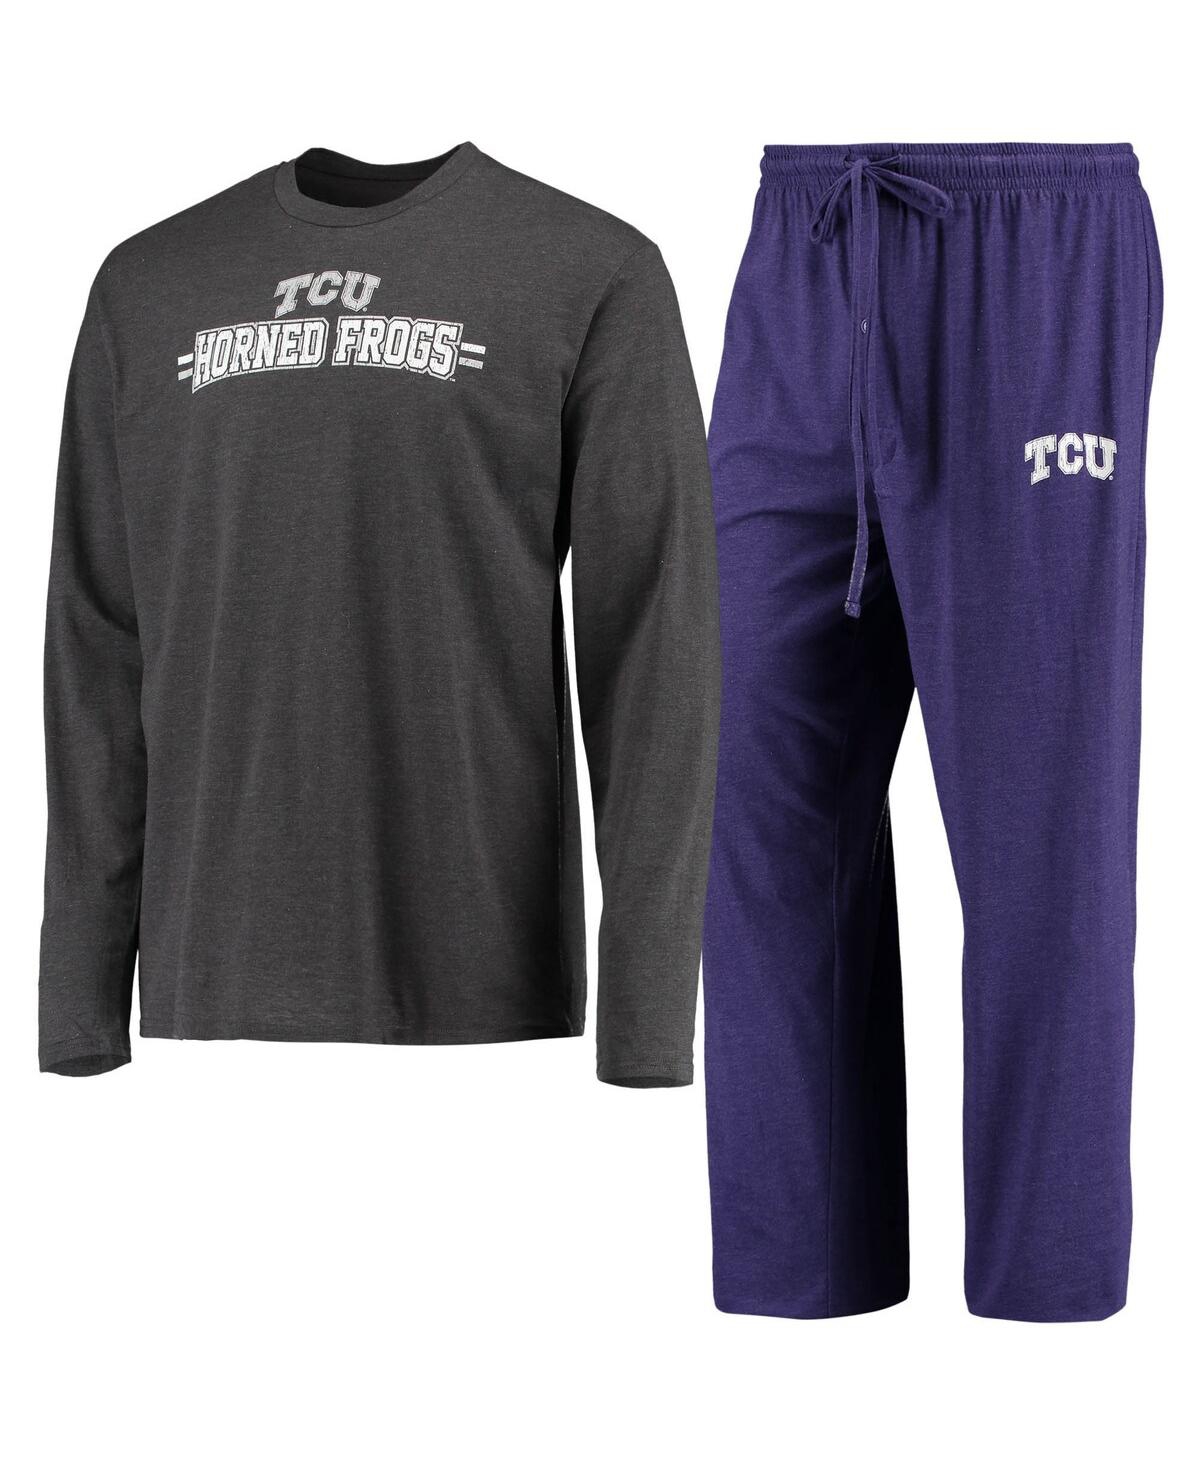 Men's Concepts Sport Purple, Heathered Charcoal Tcu Horned Frogs Meter Long Sleeve T-shirt and Pants Sleep Set - Purple, Heathered Charcoal